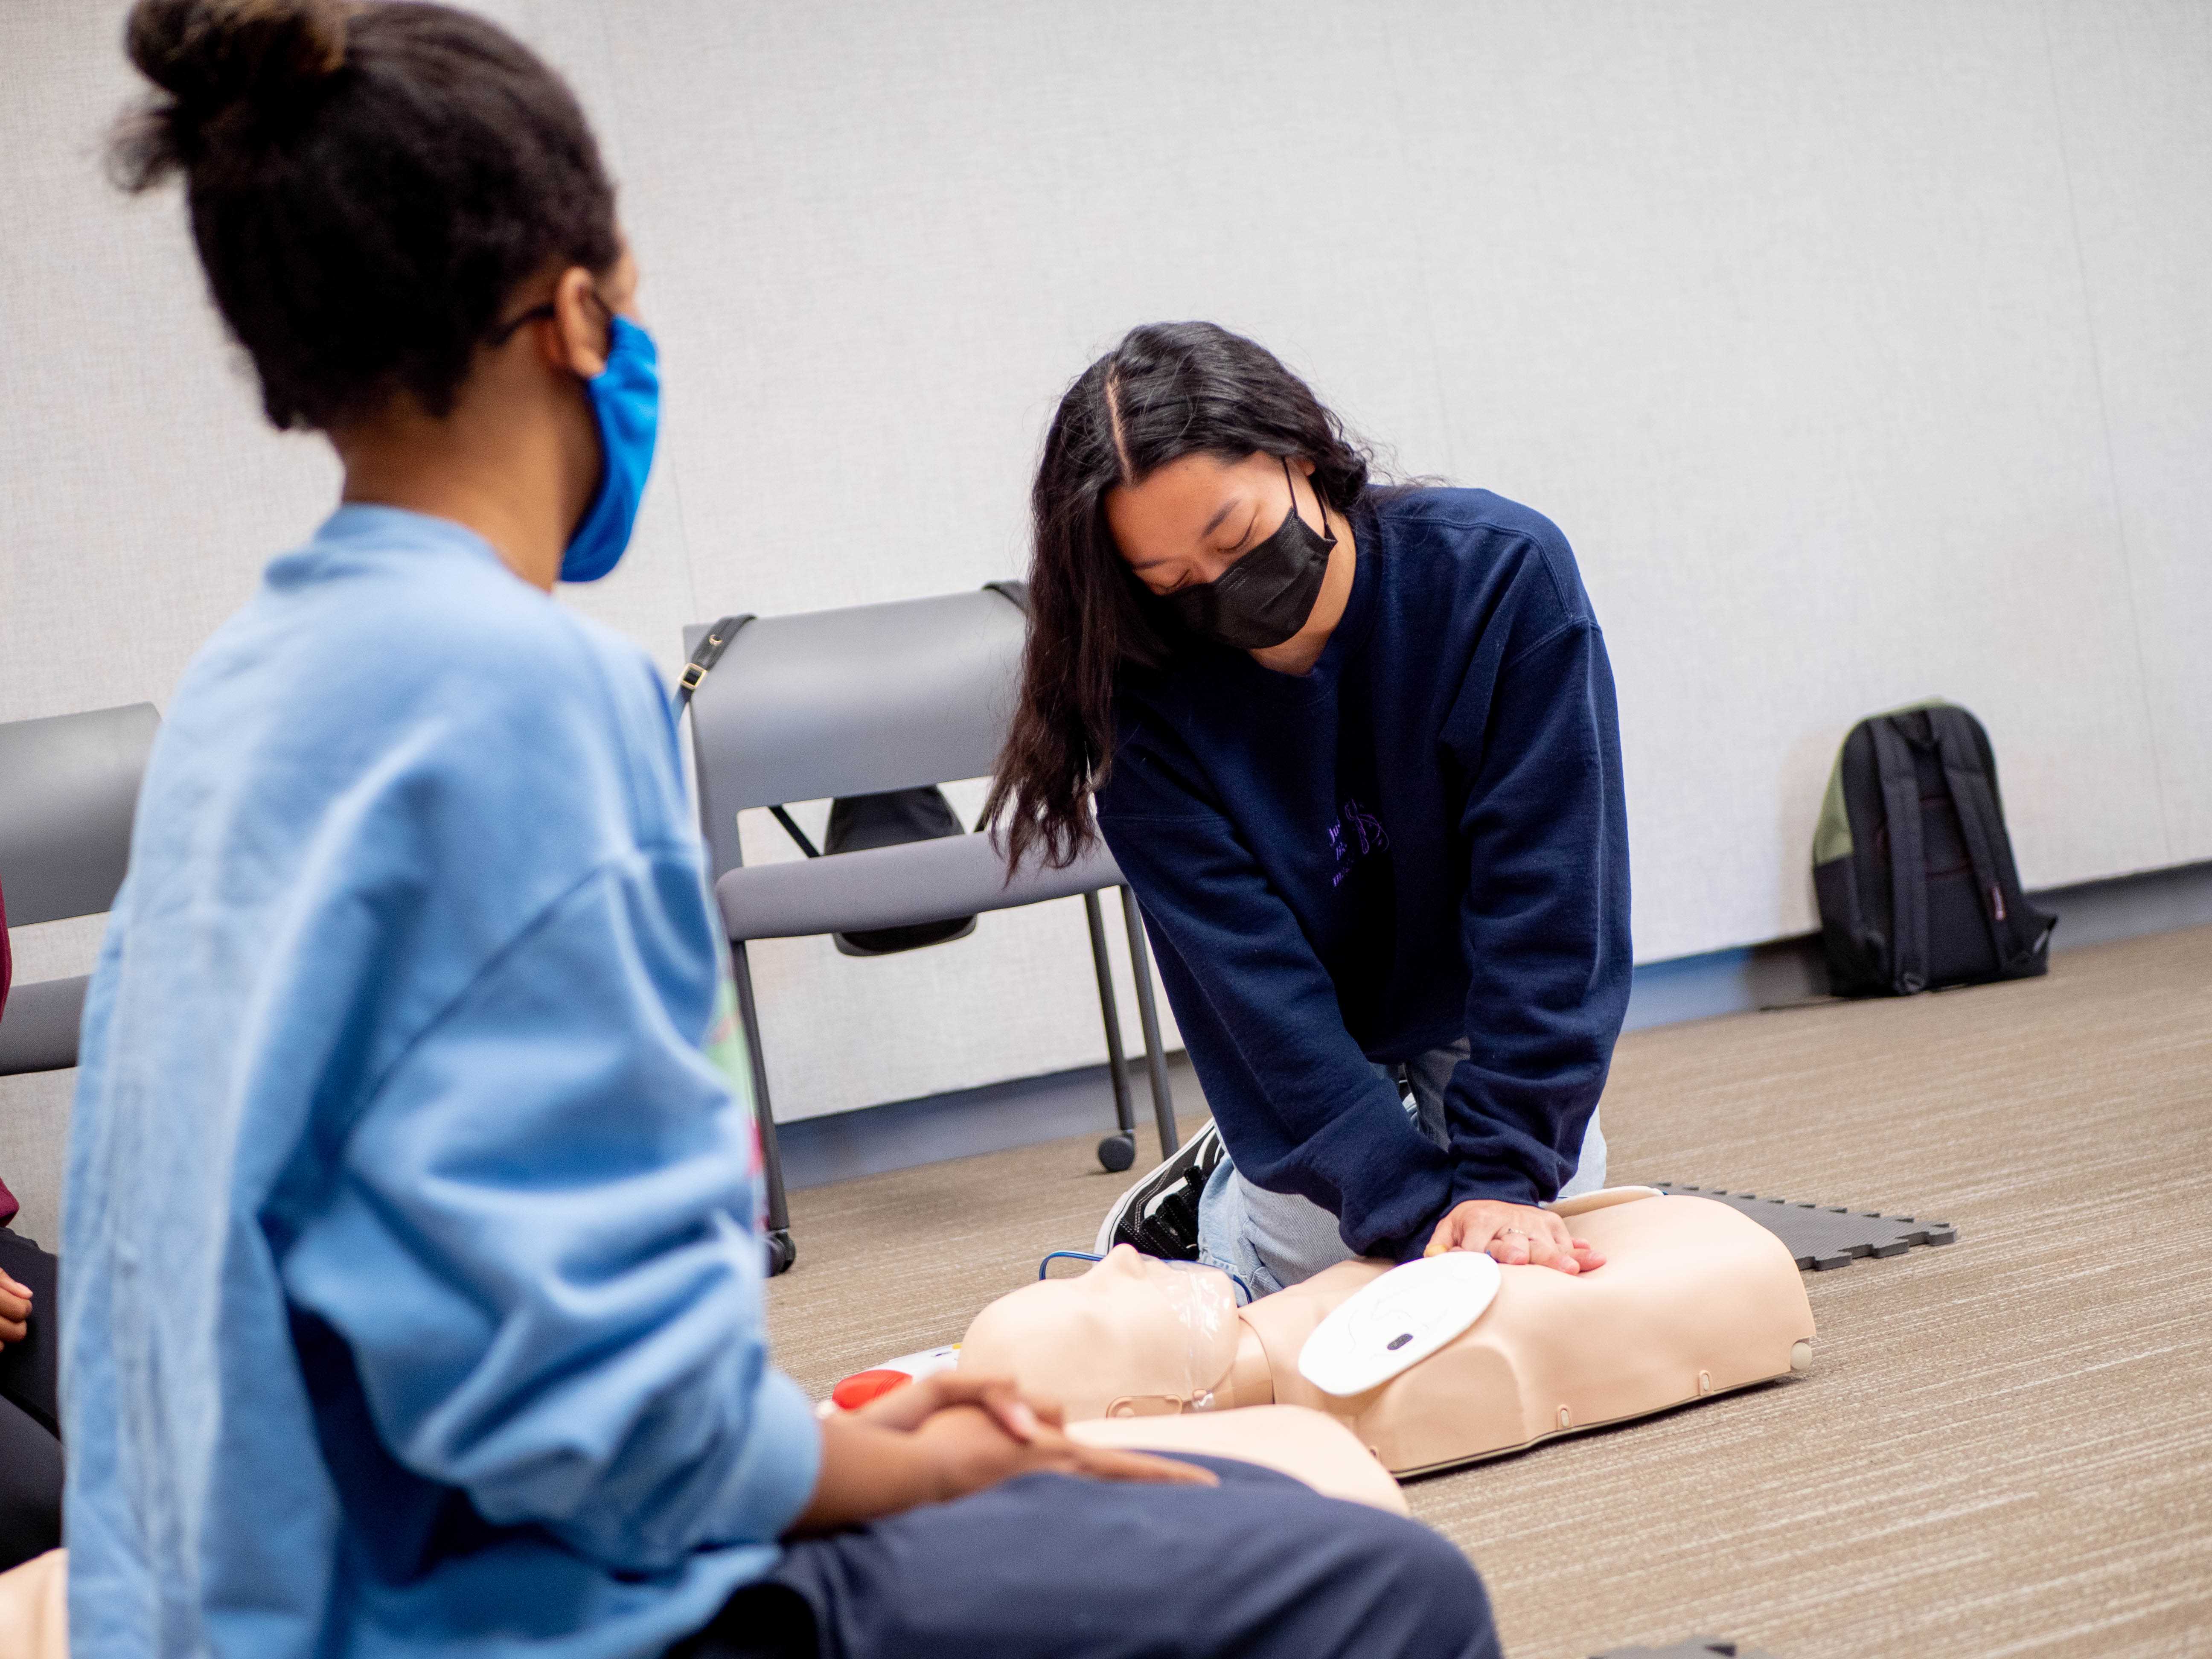 Participant administering first aid